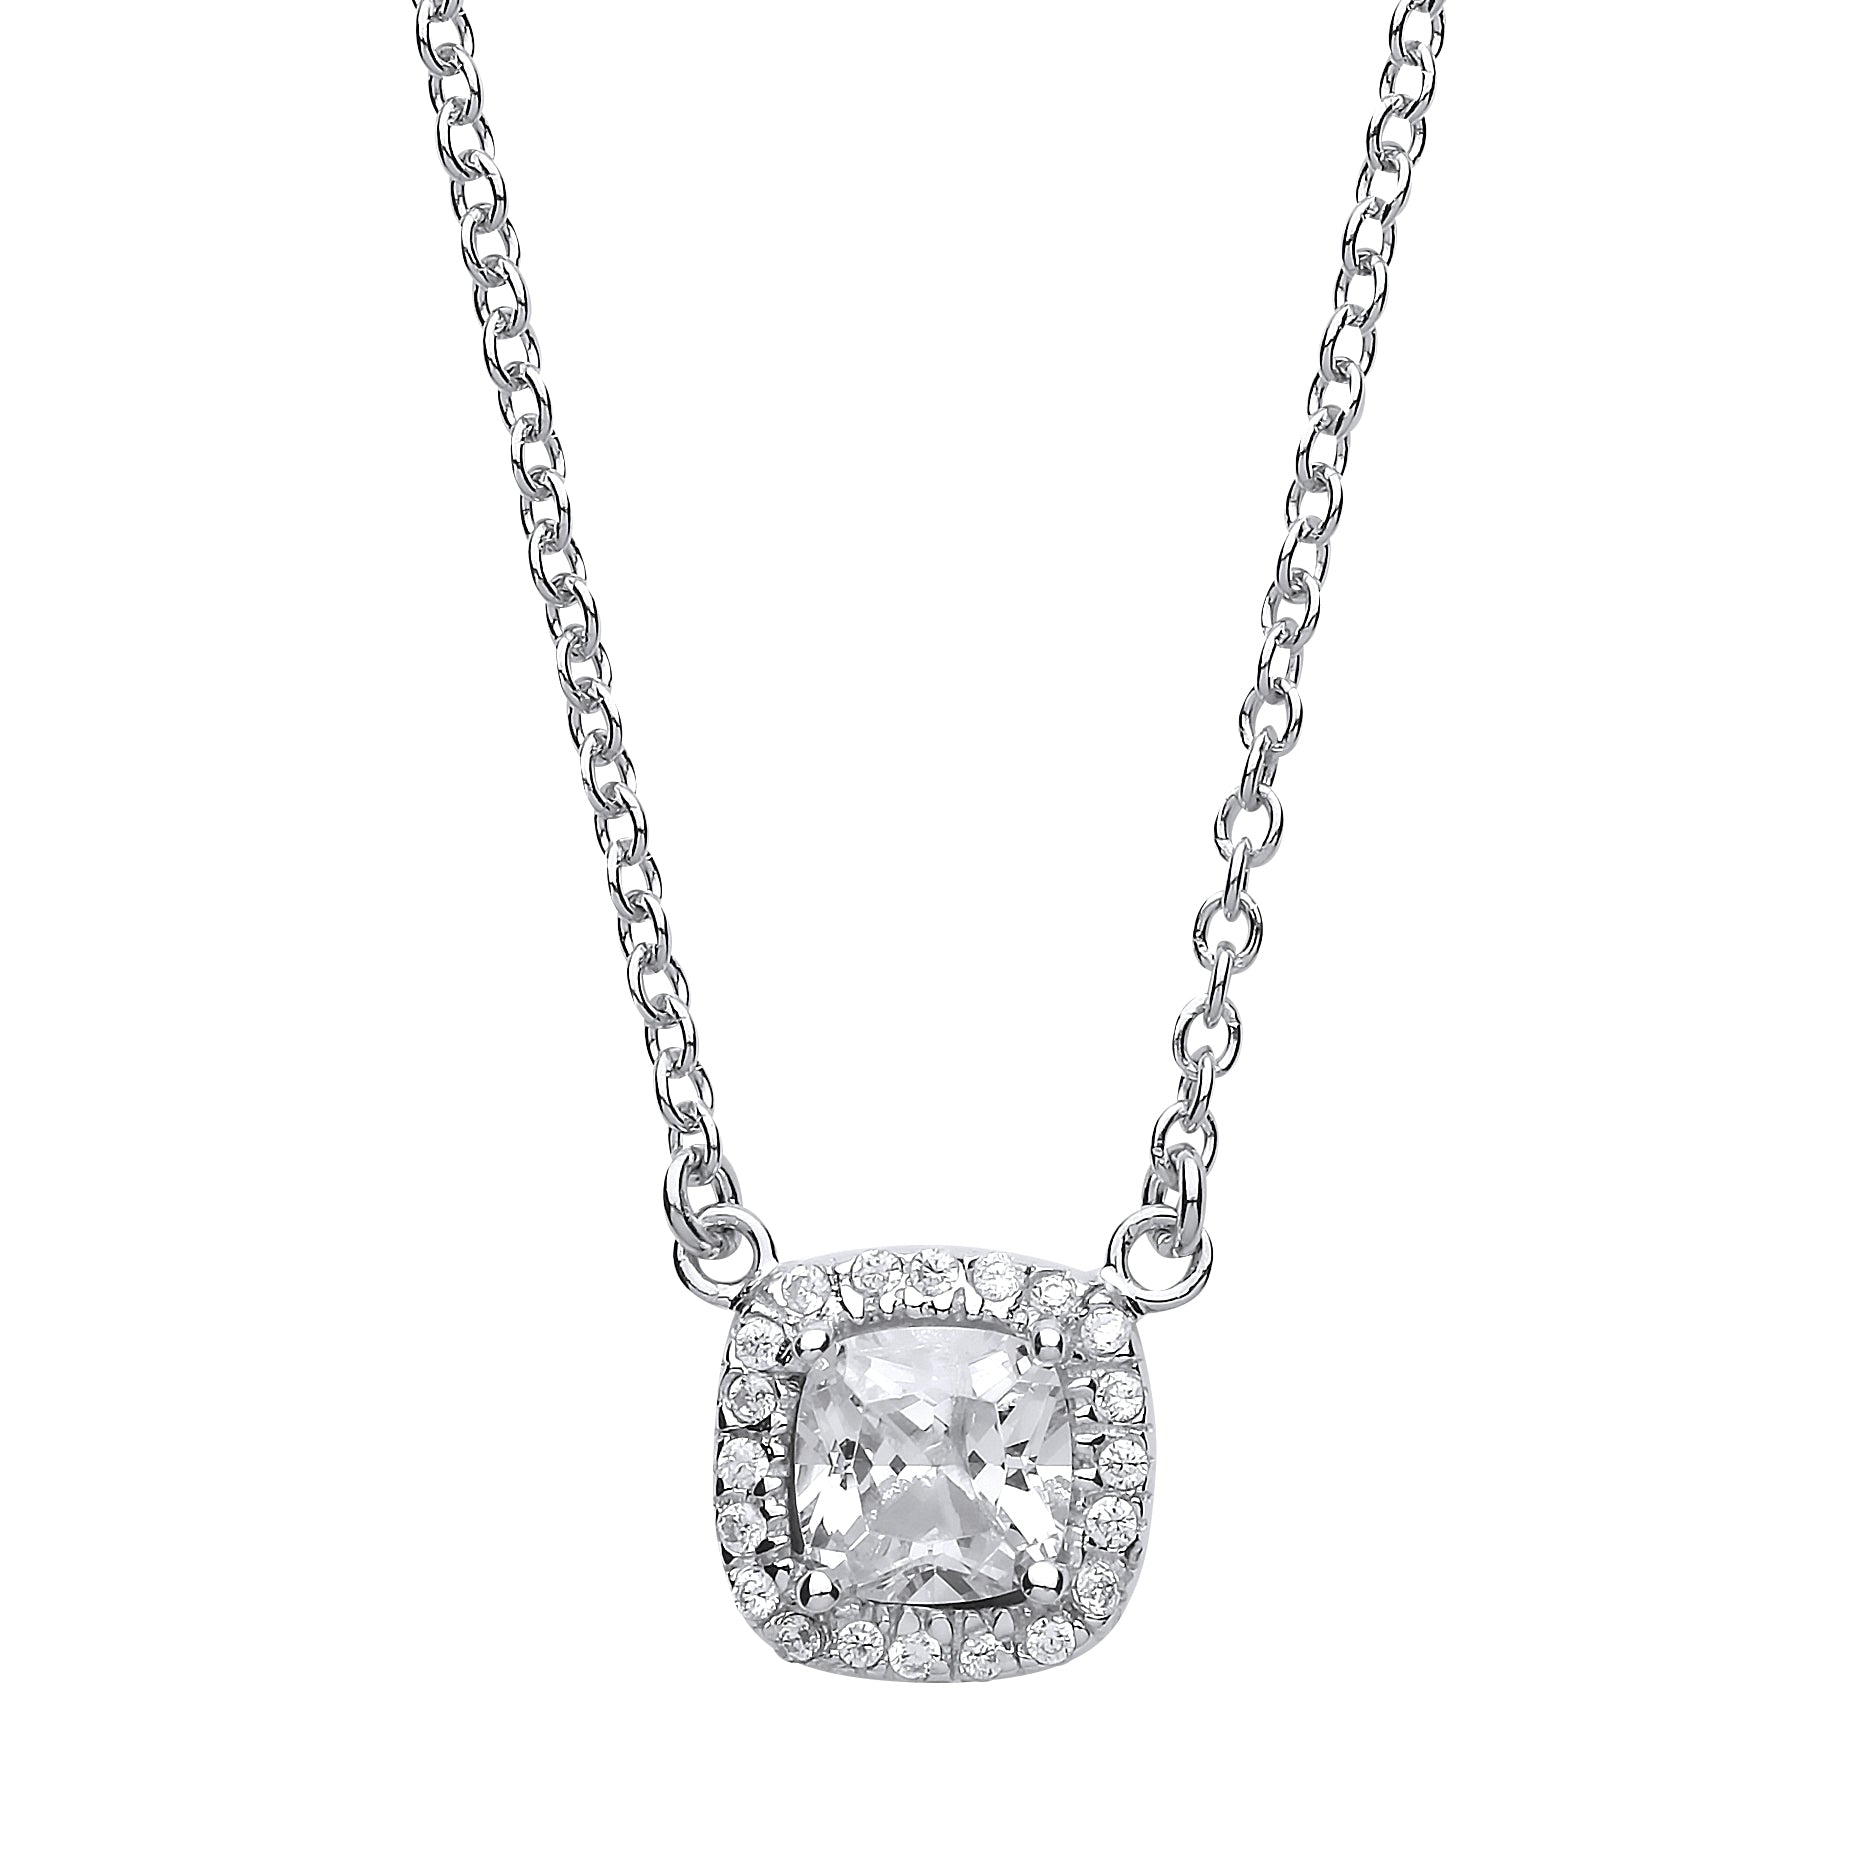 Silver  Square Cushion CZ Halo Solitaire Charm Necklace 16 + 2inch - GVK157